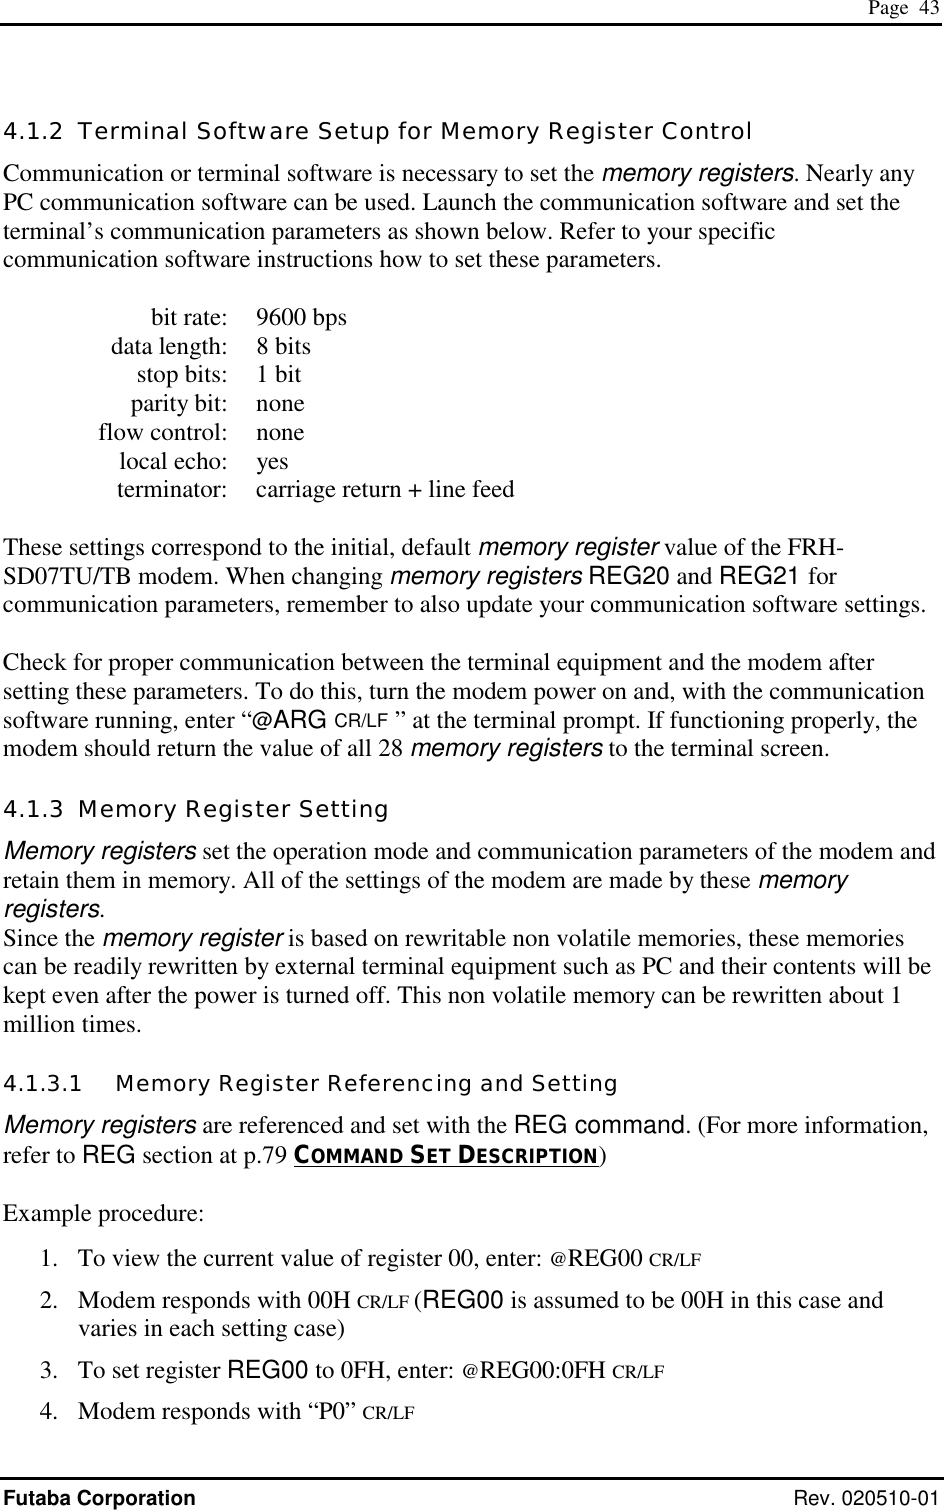  Page  43 Futaba Corporation Rev. 020510-01 4.1.2  Terminal Software Setup for Memory Register Control Communication or terminal software is necessary to set the memory registers. Nearly any PC communication software can be used. Launch the communication software and set the terminal’s communication parameters as shown below. Refer to your specific communication software instructions how to set these parameters.    bit rate:  9600 bps   data length:  8 bits   stop bits:  1 bit  parity bit: none  flow control: none  local echo: yes   terminator:  carriage return + line feed  These settings correspond to the initial, default memory register value of the FRH-SD07TU/TB modem. When changing memory registers REG20 and REG21 for communication parameters, remember to also update your communication software settings.  Check for proper communication between the terminal equipment and the modem after setting these parameters. To do this, turn the modem power on and, with the communication software running, enter “@ARG CR/LF  ” at the terminal prompt. If functioning properly, the modem should return the value of all 28 memory registers to the terminal screen. 4.1.3  Memory Register Setting Memory registers set the operation mode and communication parameters of the modem and retain them in memory. All of the settings of the modem are made by these memory registers. Since the memory register is based on rewritable non volatile memories, these memories can be readily rewritten by external terminal equipment such as PC and their contents will be kept even after the power is turned off. This non volatile memory can be rewritten about 1 million times. 4.1.3.1   Memory Register Referencing and Setting Memory registers are referenced and set with the REG command. (For more information, refer to REG section at p.79 COMMAND SET DESCRIPTION)  Example procedure: 1.  To view the current value of register 00, enter: @REG00 CR/LF 2.  Modem responds with 00H CR/LF (REG00 is assumed to be 00H in this case and varies in each setting case) 3.  To set register REG00 to 0FH, enter: @REG00:0FH CR/LF 4.  Modem responds with “P0” CR/LF 